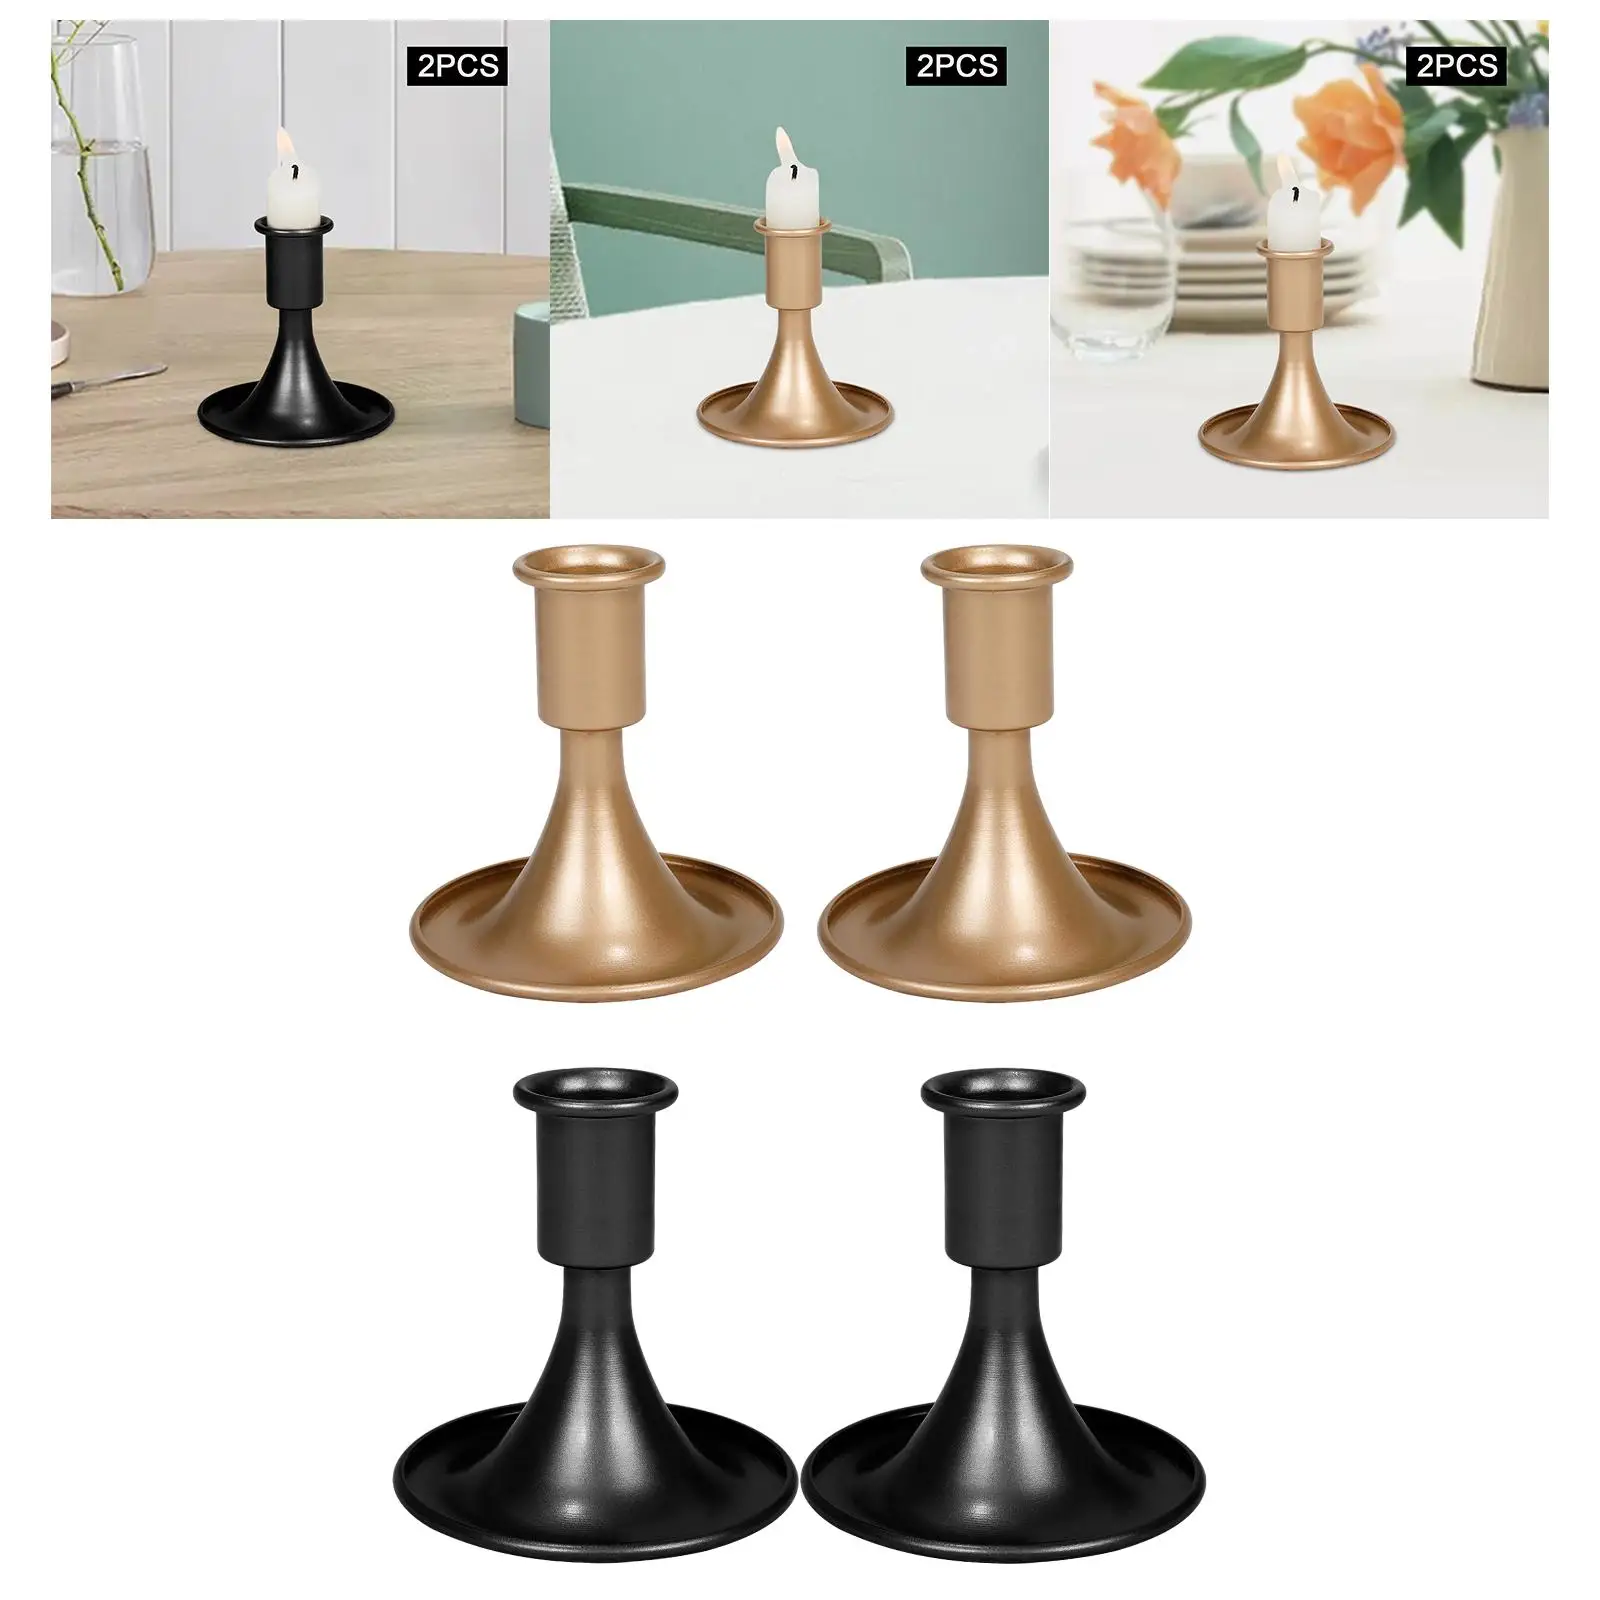 2x Pillar Candle Holder Candle Stand Candlelight Holder Candlestick for Festivals Anniversary Thanksgiving Dining Room Decor